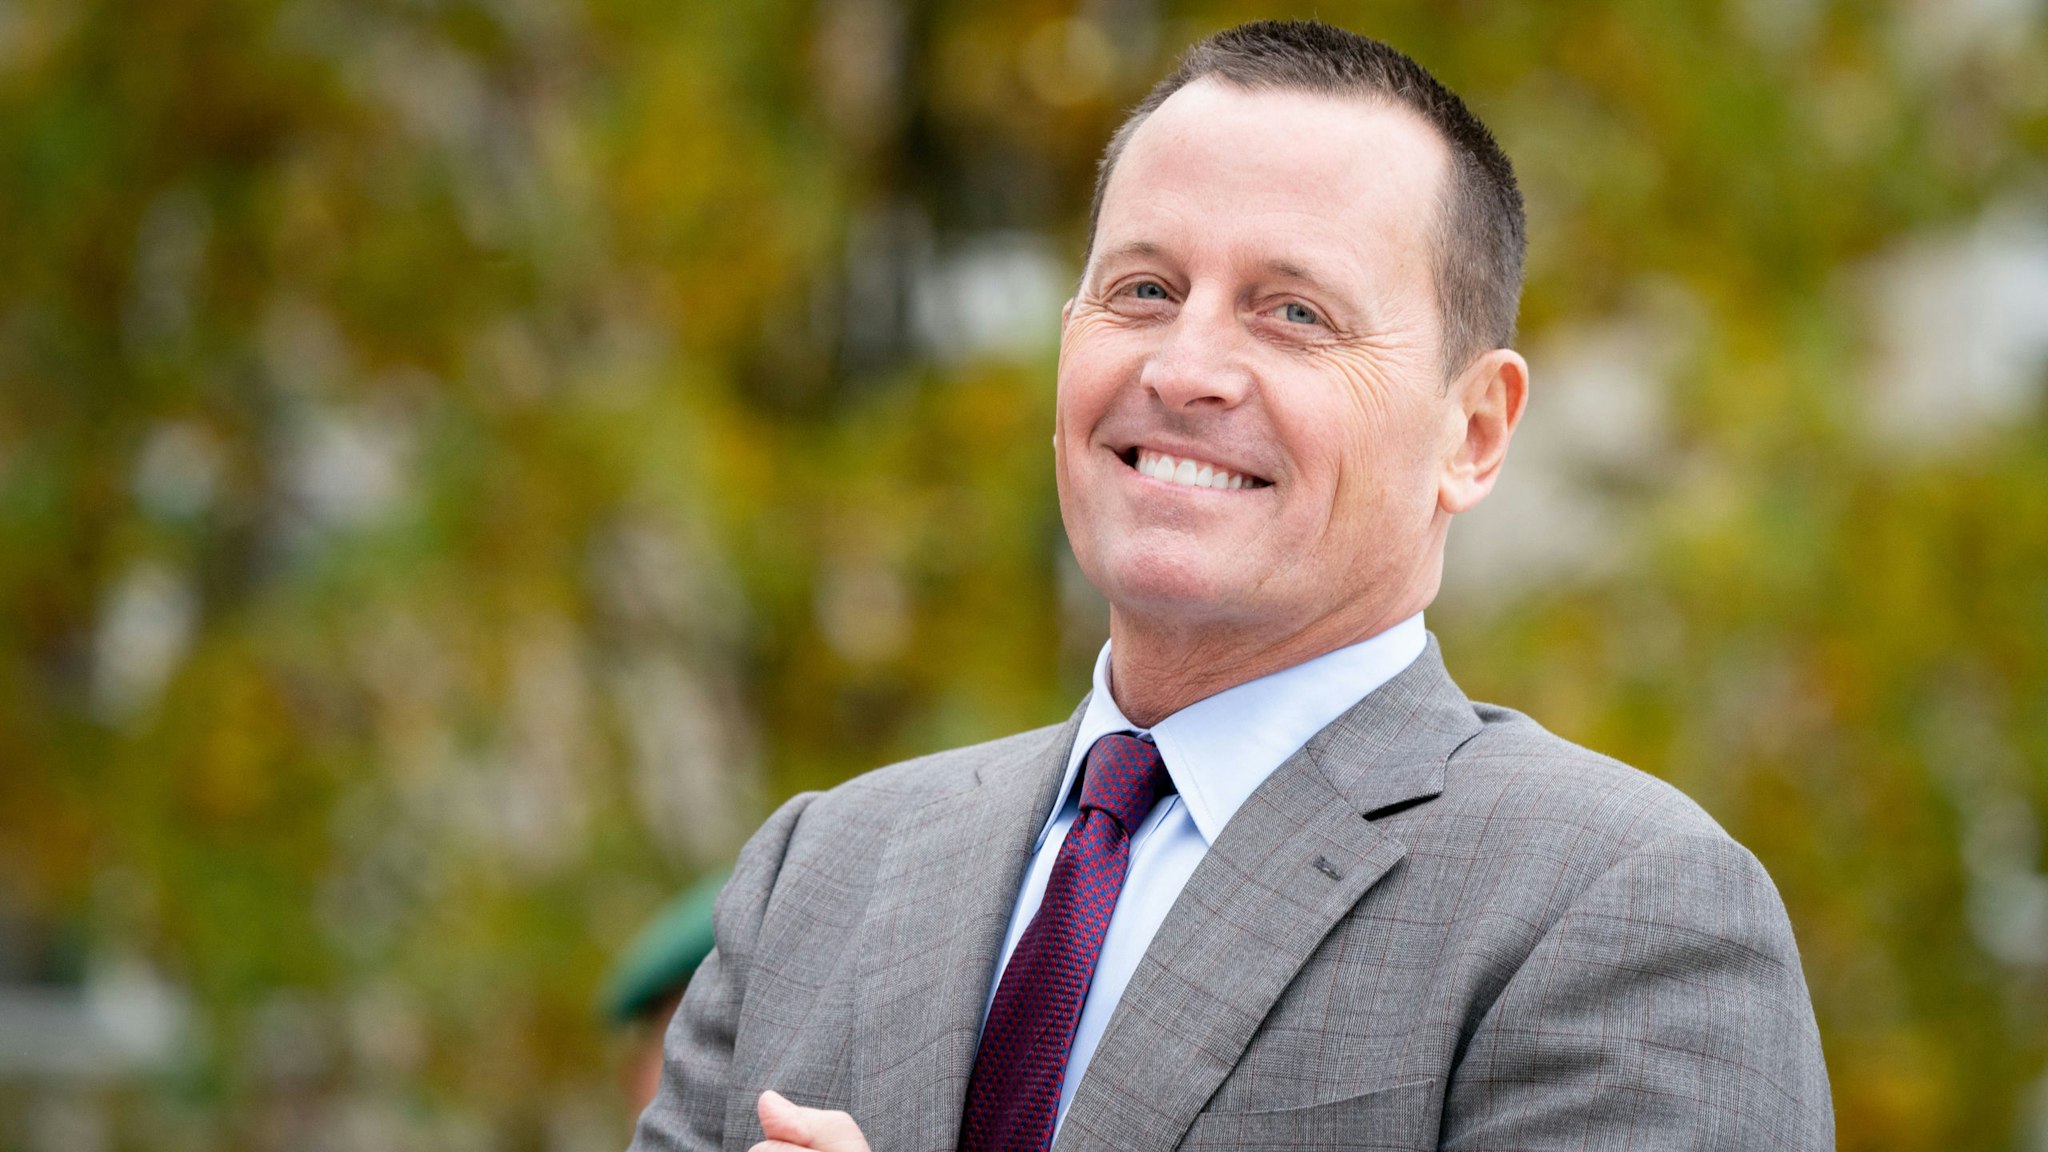 08 November 2019, Berlin: Richard Grenell, Ambassador of the United States to Germany, stands in front of the Department of Defense and waits for the US Secretary of State and the German Secretary of Defense.